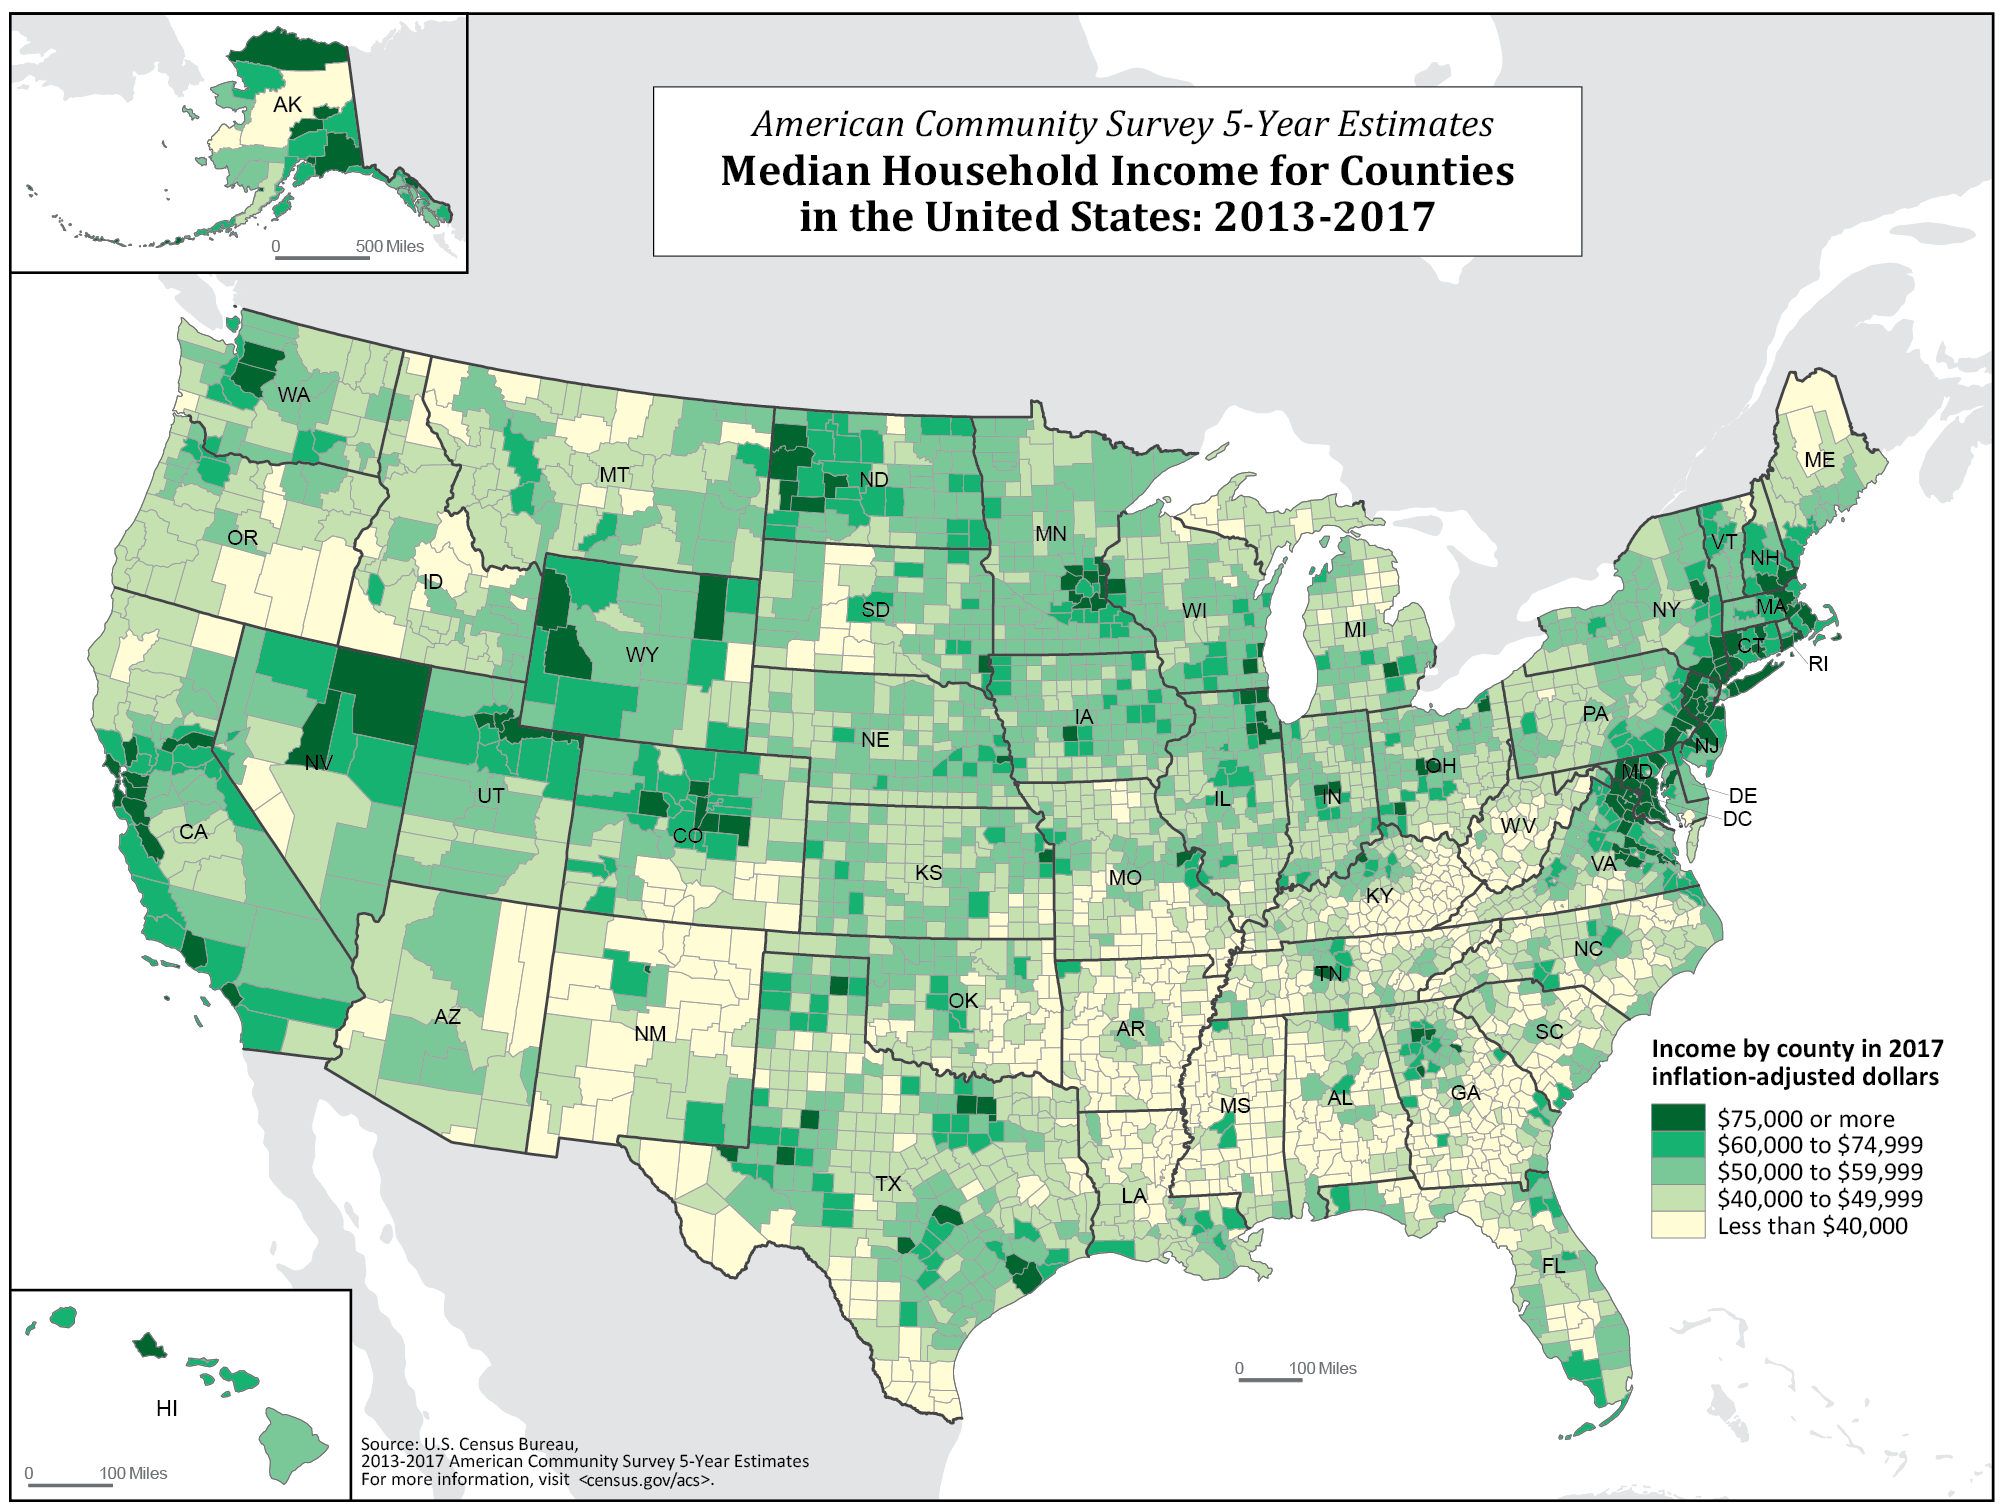 Differences in Growth Across U.S. Counties